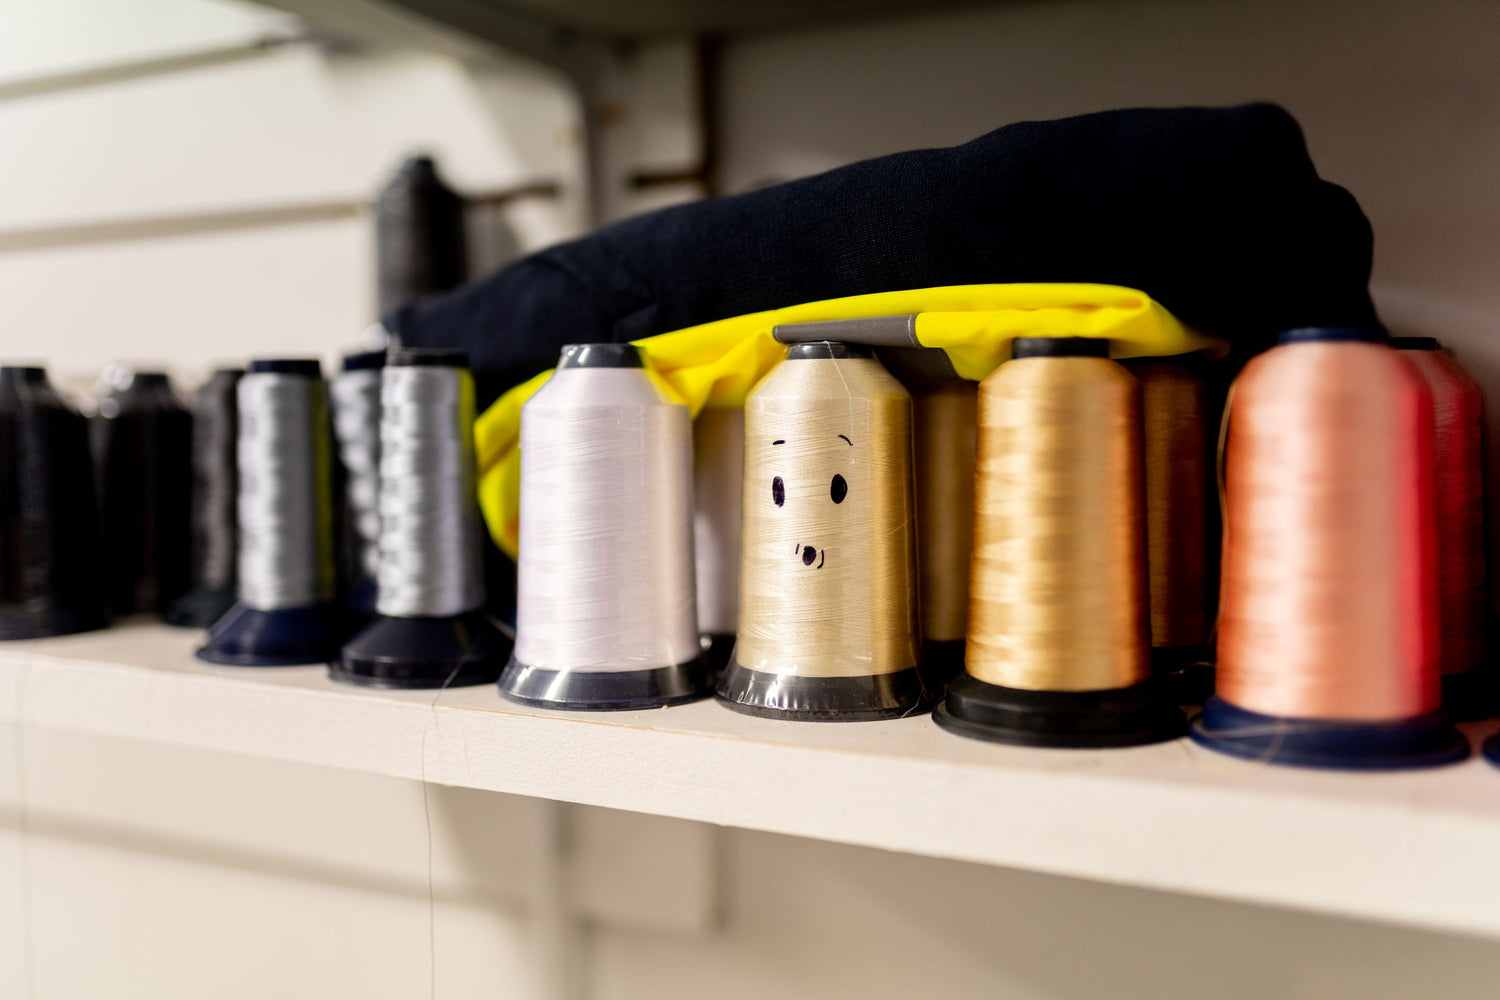 Thread rolls for use on an embroidery machine. One of the rolls has a smile on it's face.